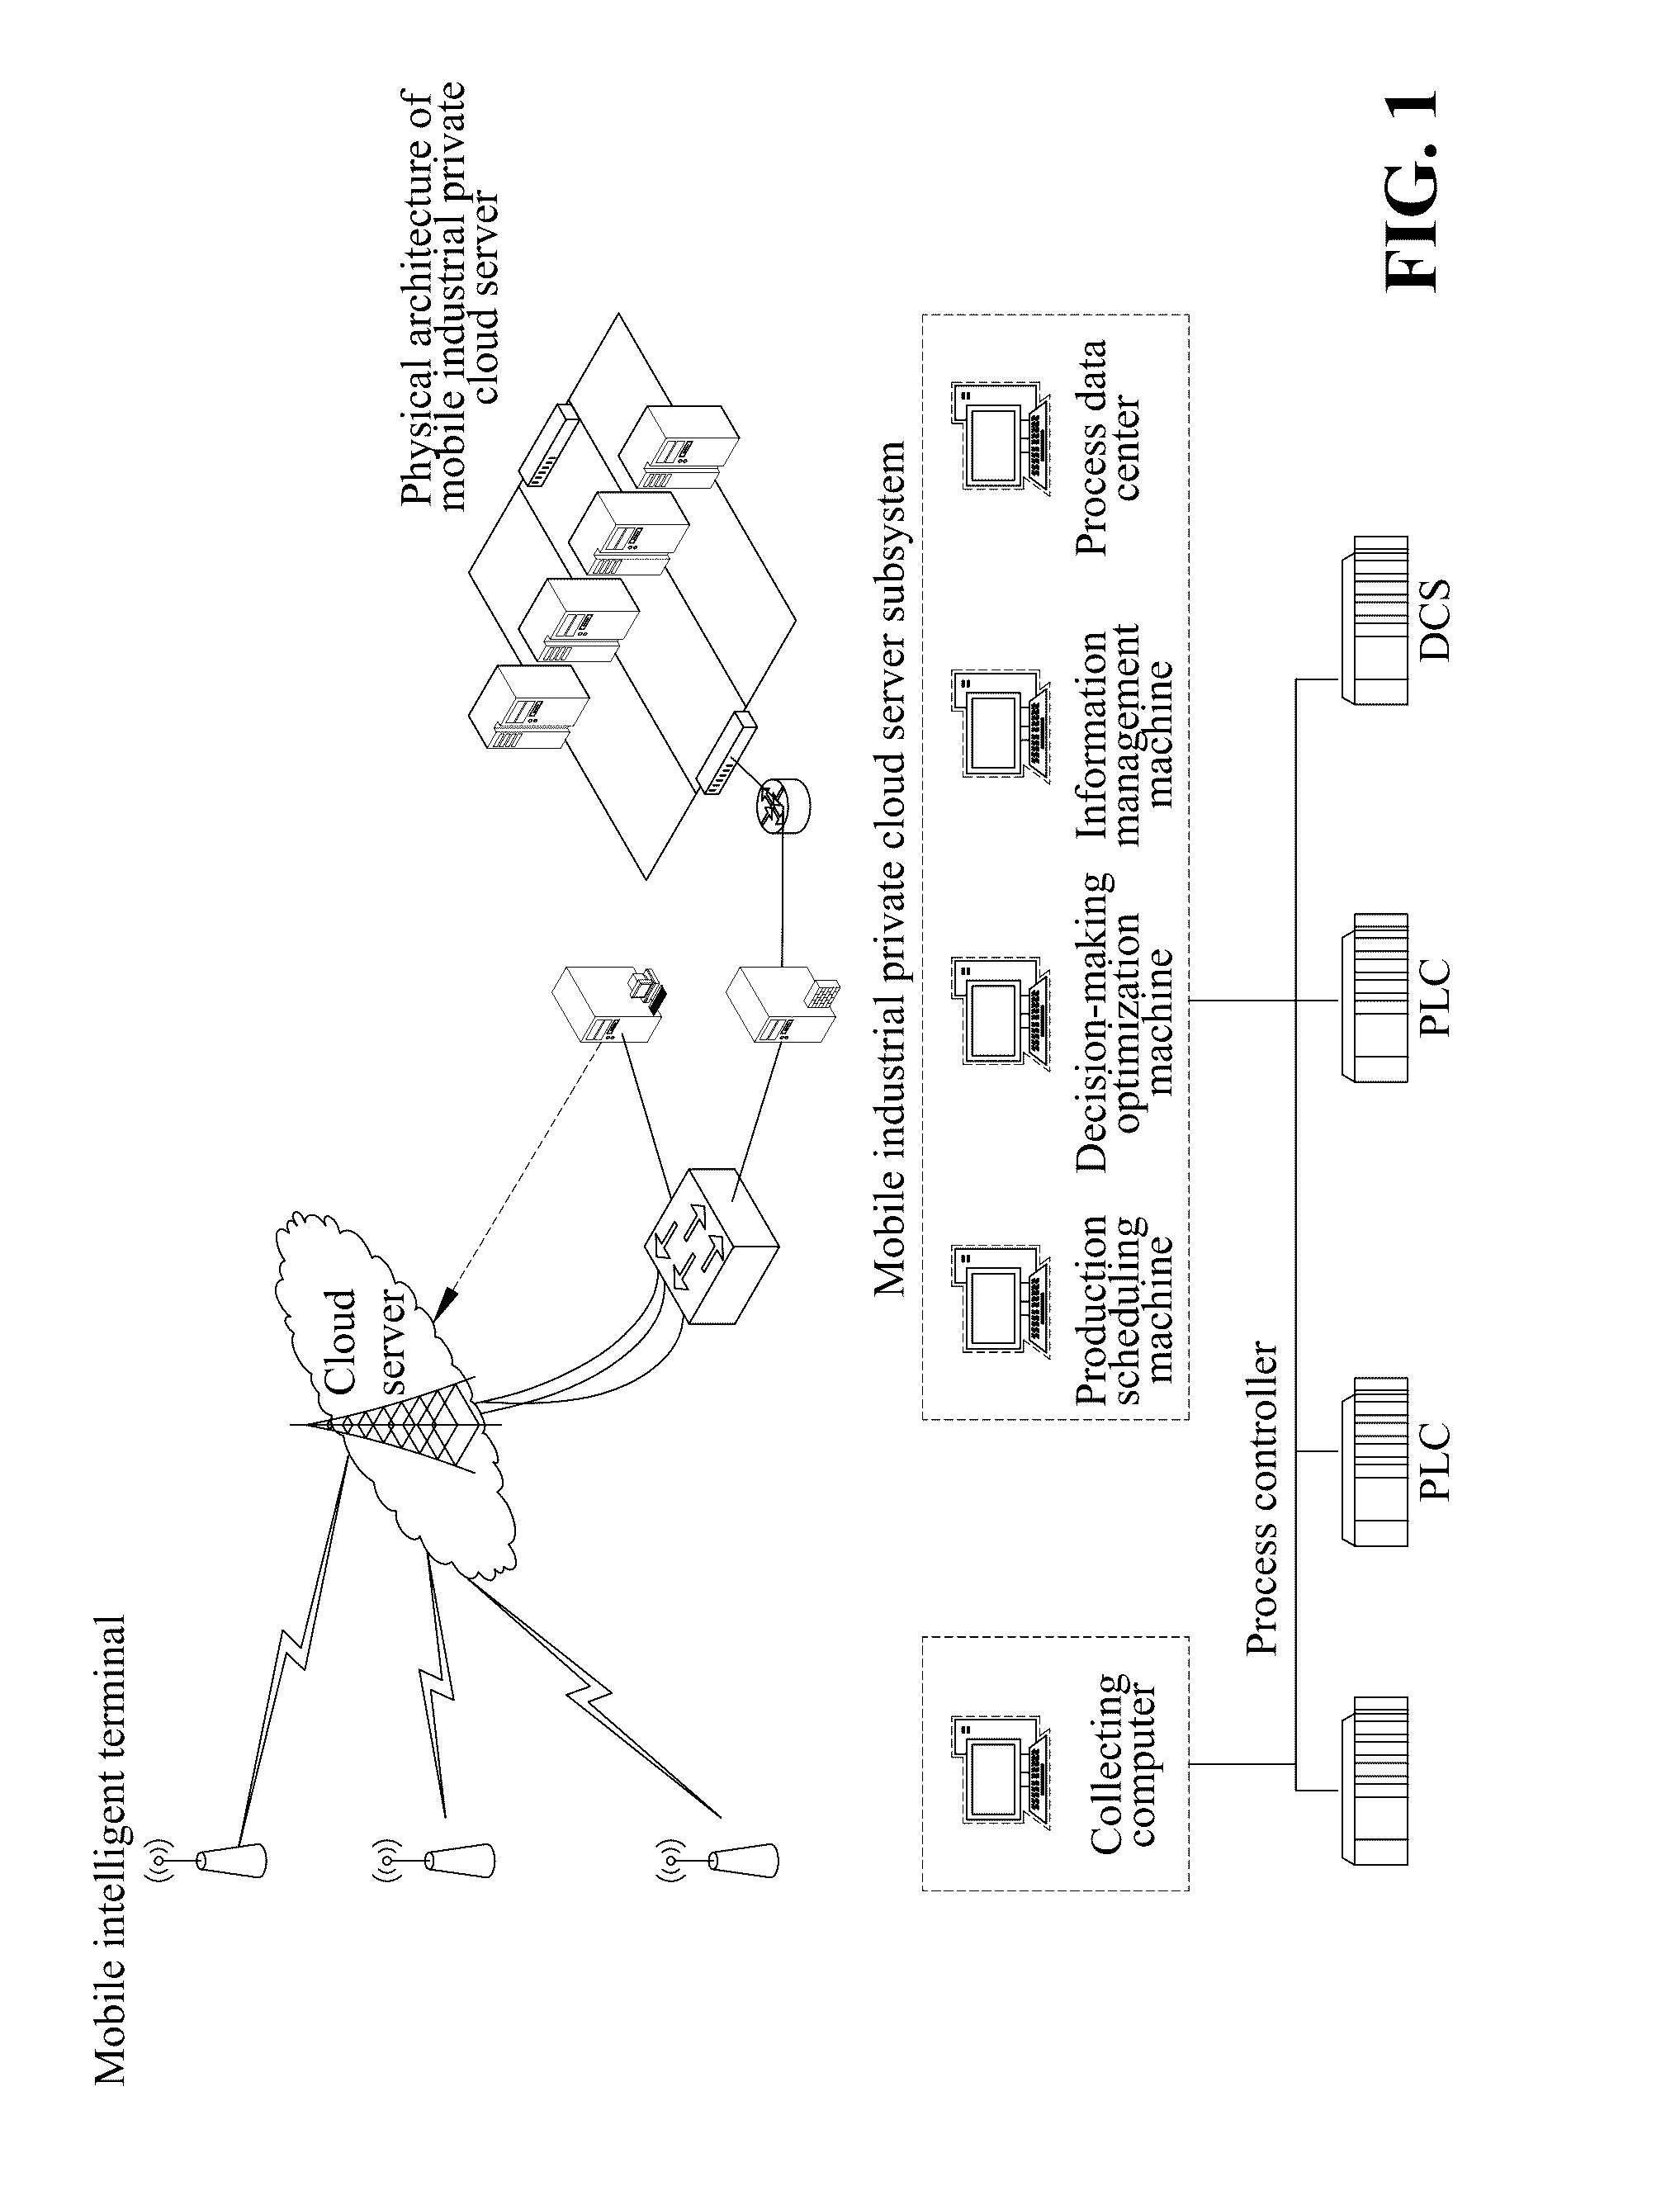 Optimized decision-making system and method for multiple ore dressing production indexes based on cloud server and mobile terminals